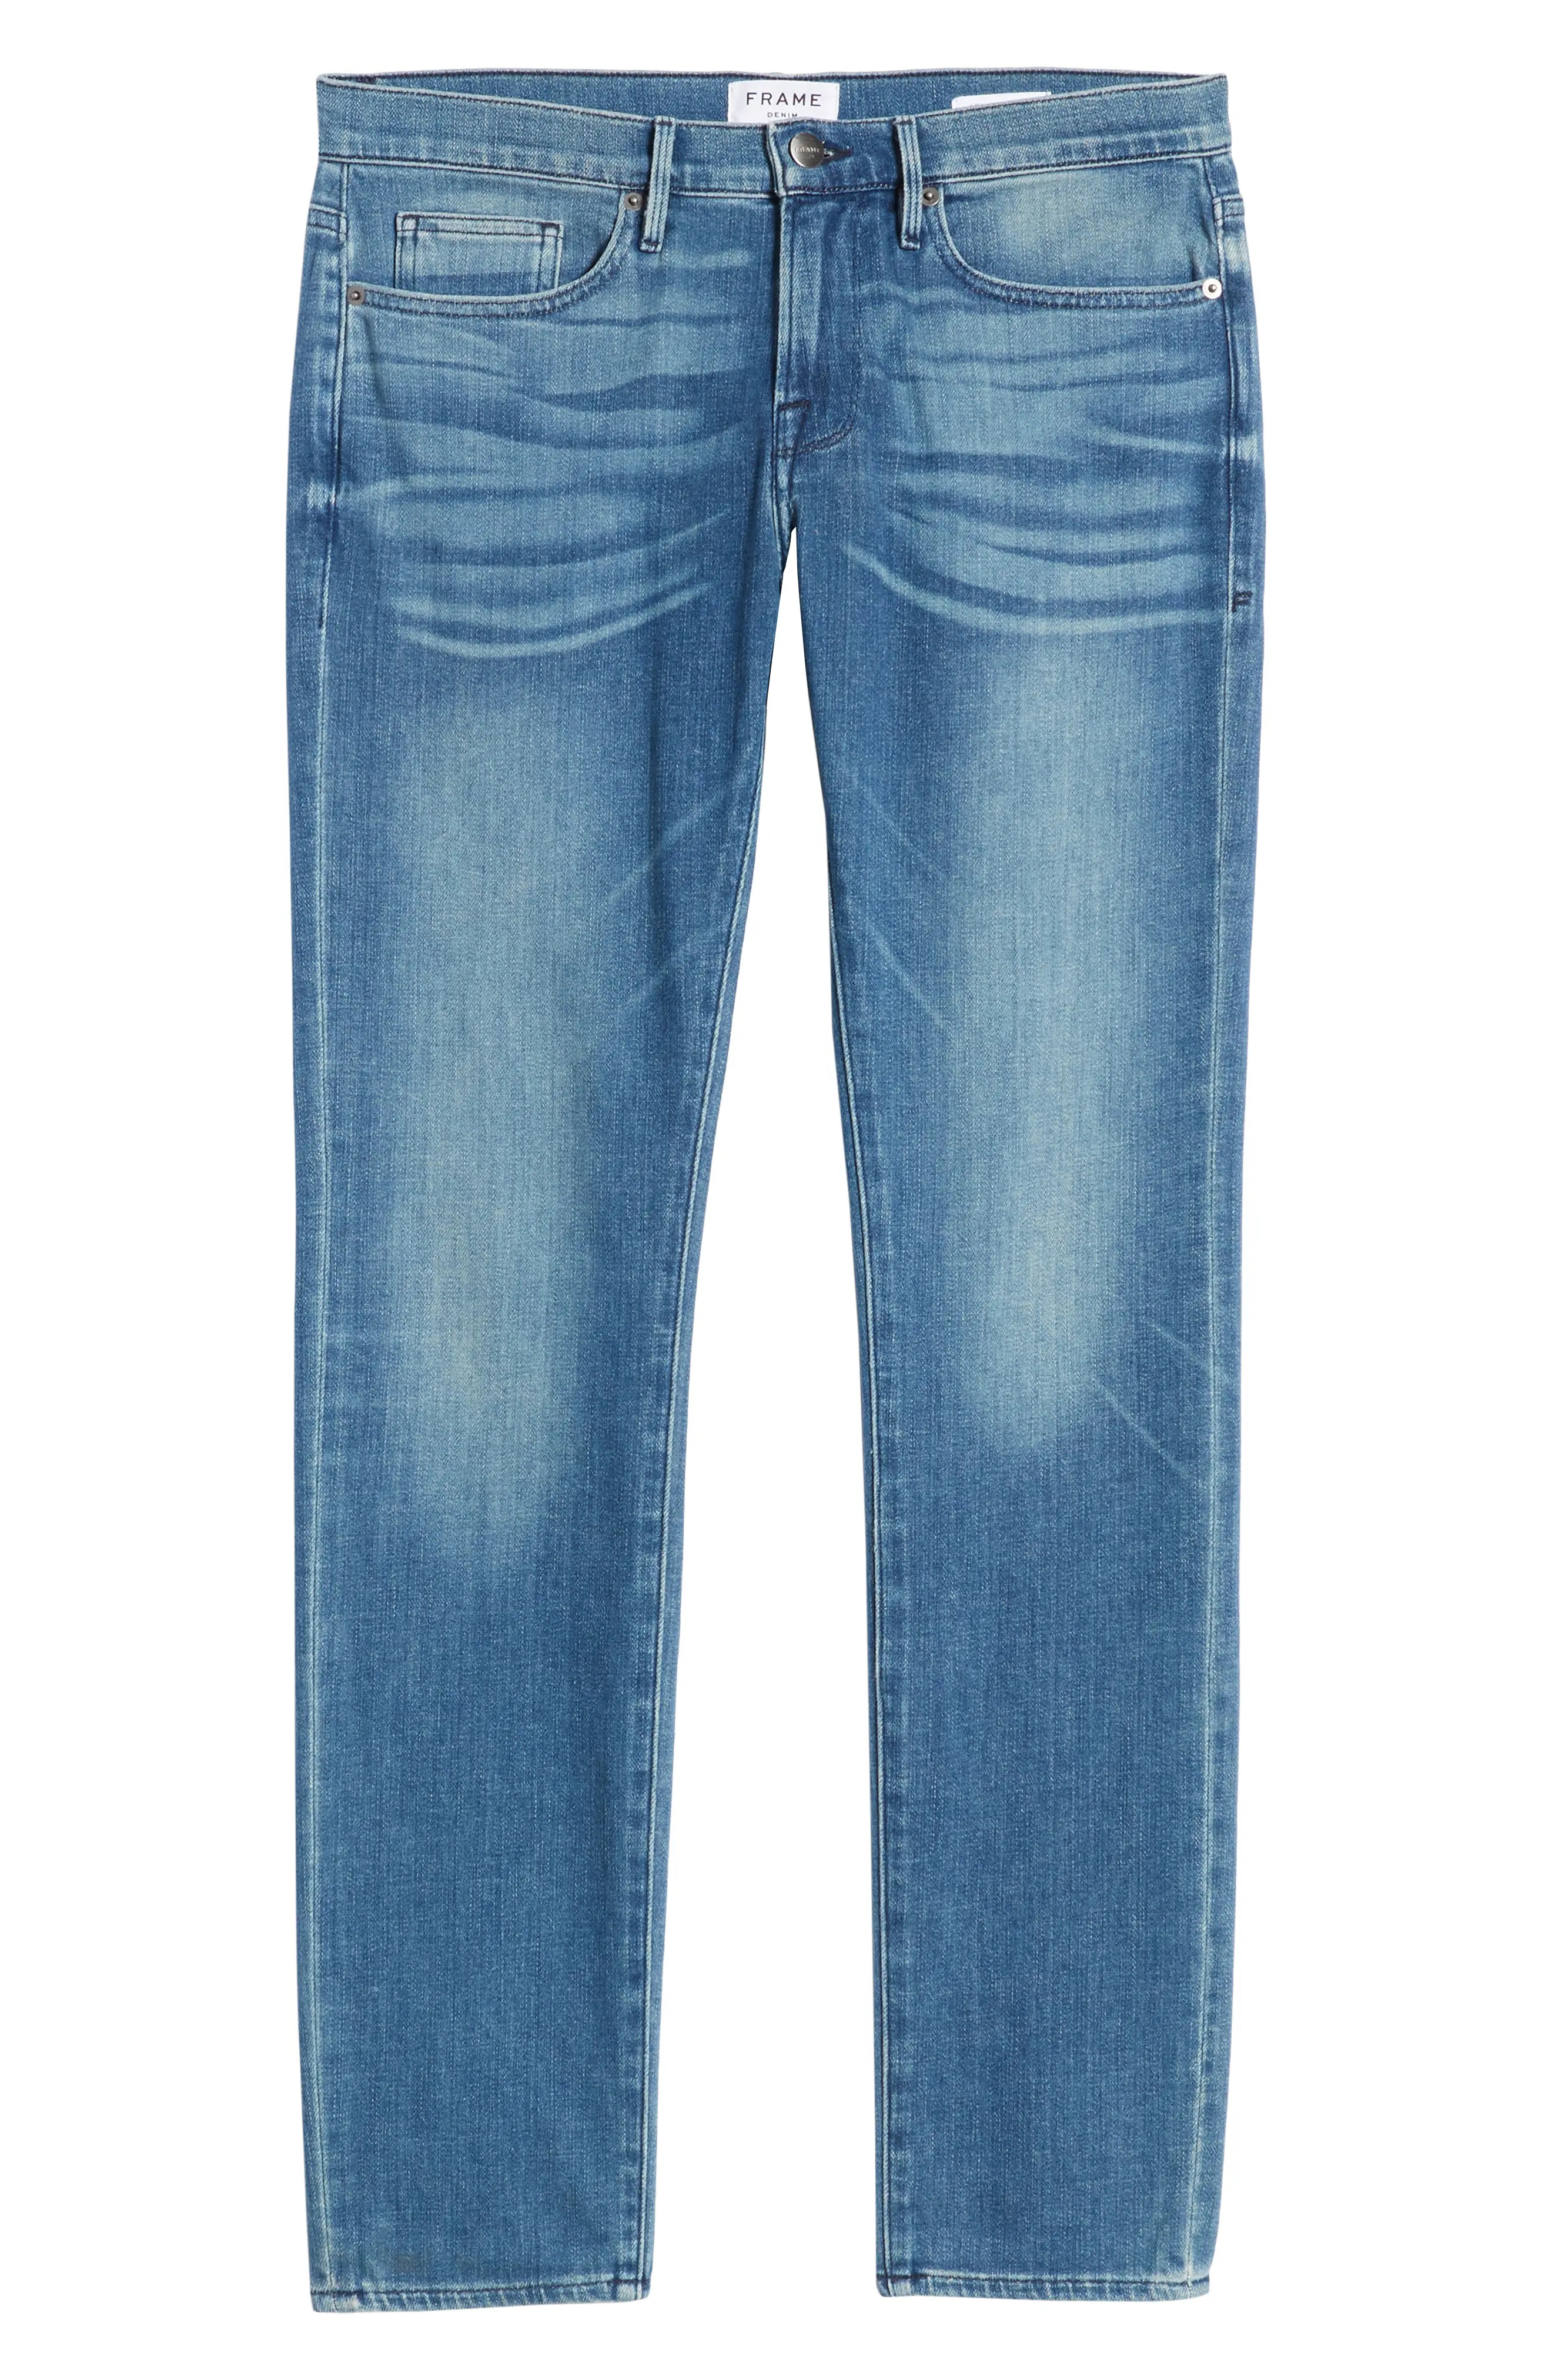 L'Homme Skinny Fit Jeans - 5